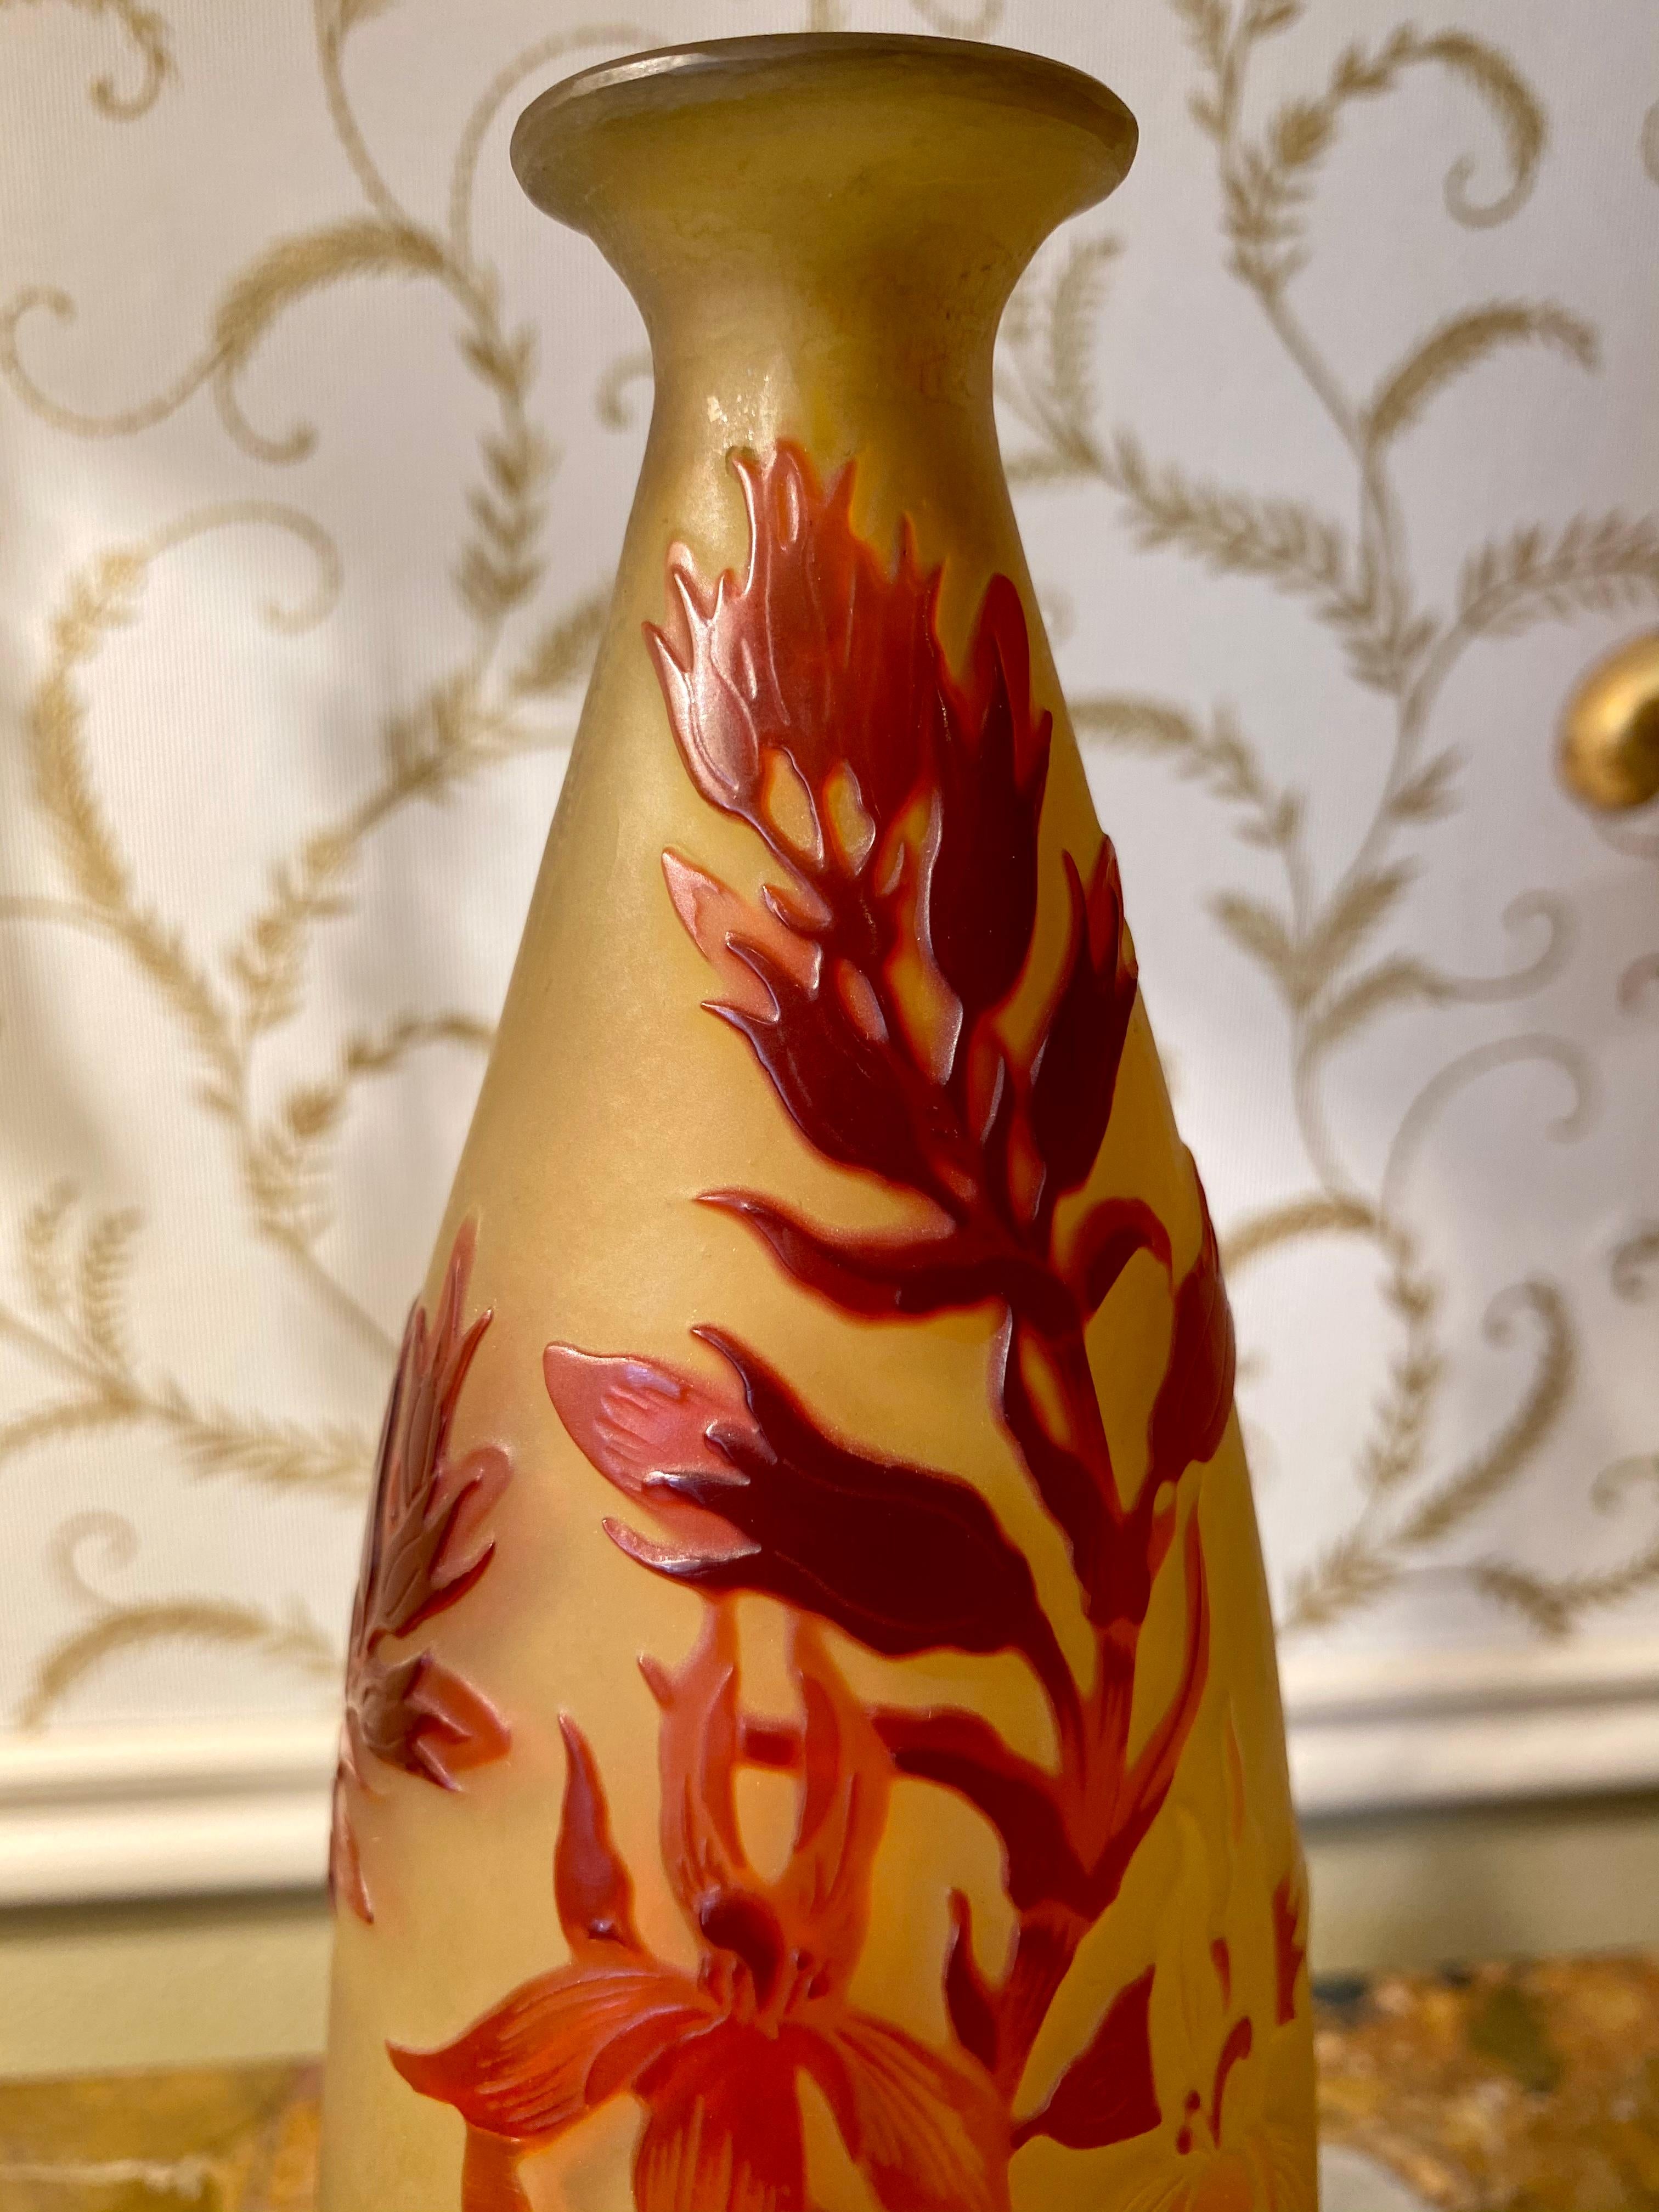 Emile Galle, Art Nouveau Style Elongated Piriform Vase with Irises 20th Century In Good Condition For Sale In Beaune, FR